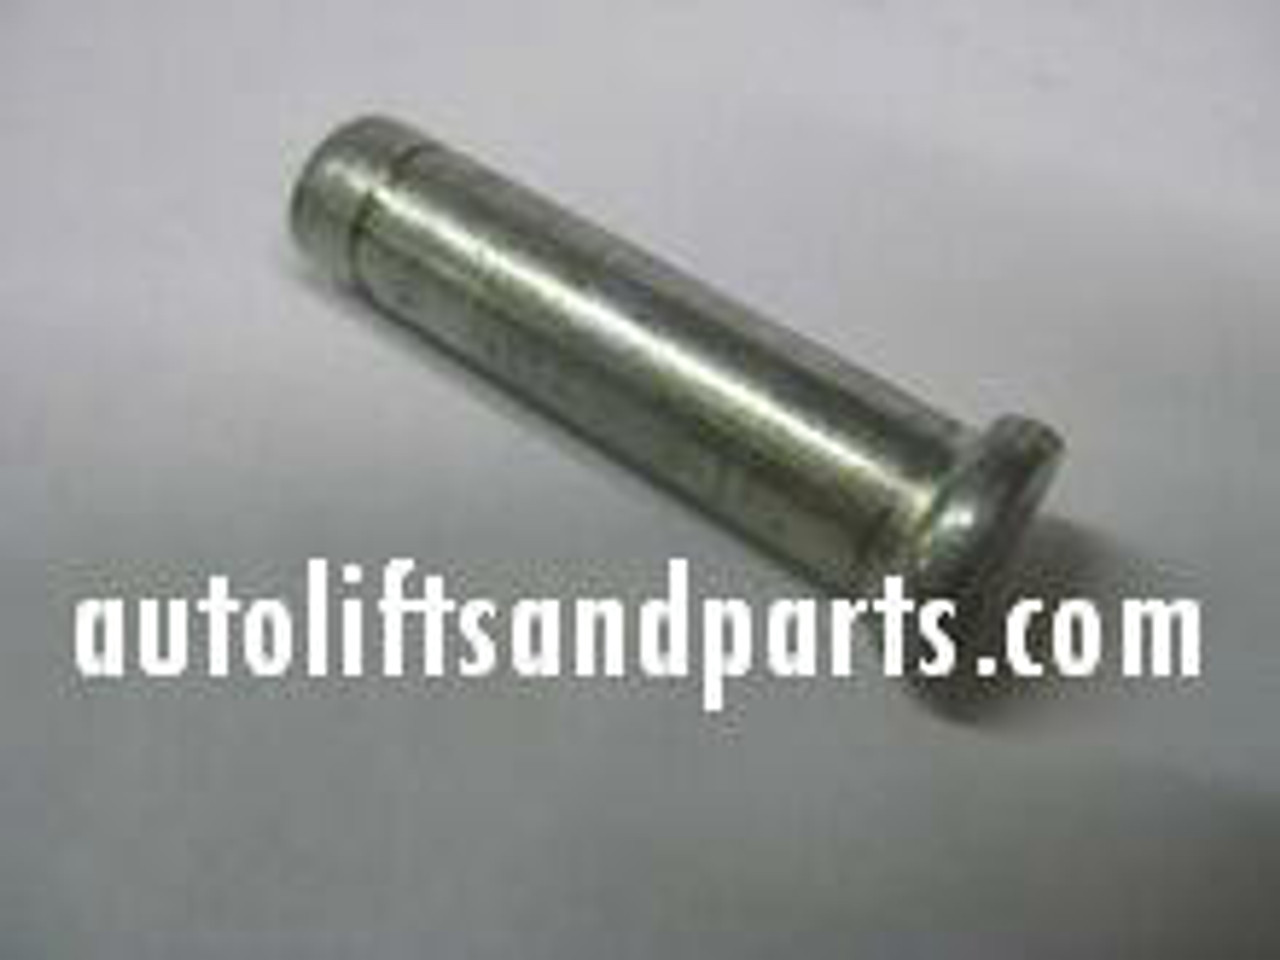 205154 Benwil Clevis Pin